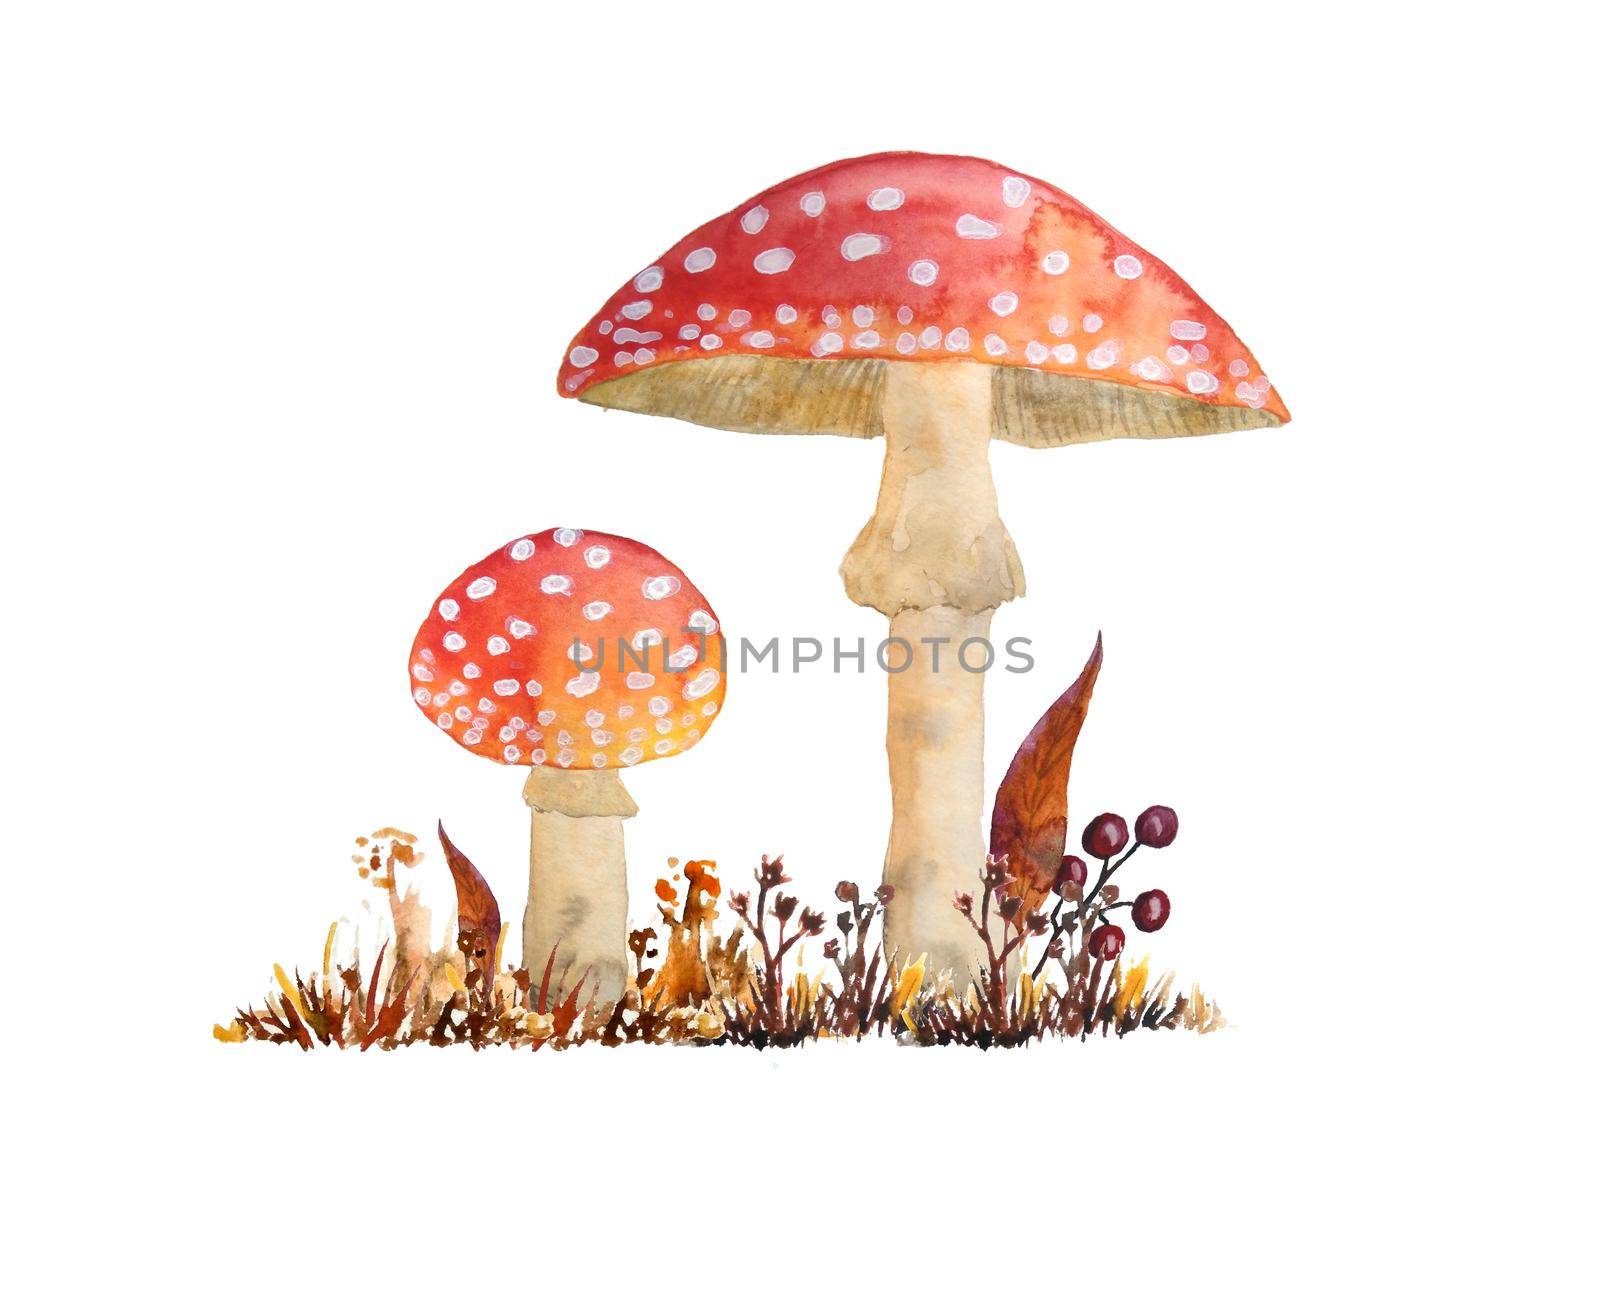 hand drawn watercolor dangerous scary poisonous mushrooms red Amanita muscaria. Wild fungus fungi from autumn fall forest woodland in dry grass natural season perfect for halloween design textile